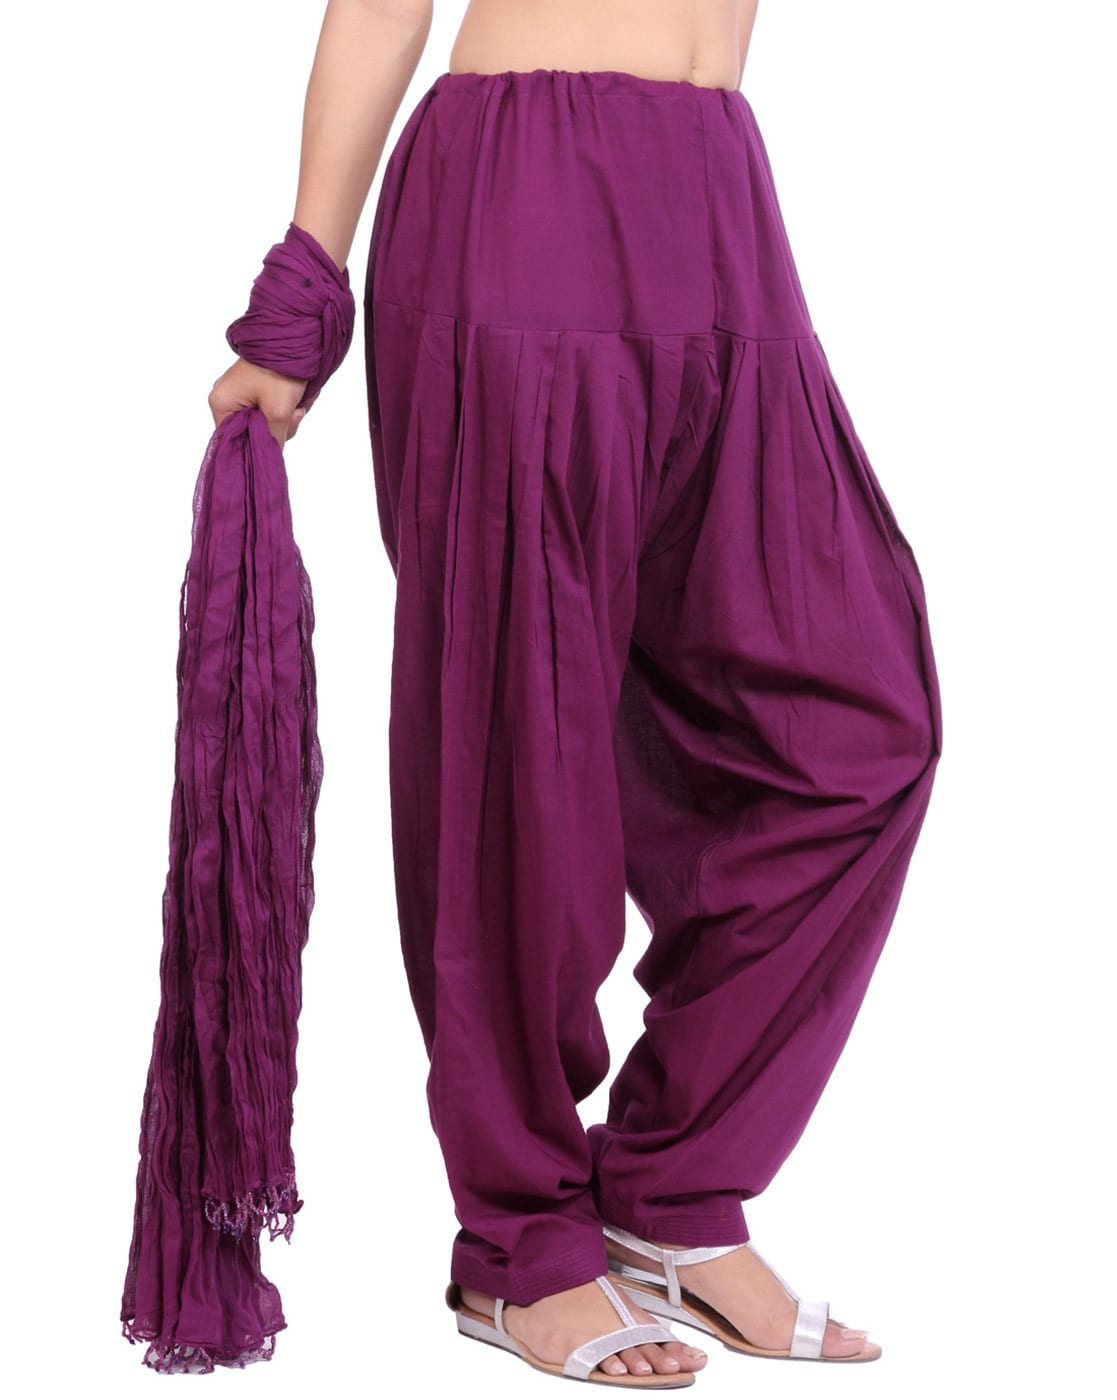 Patiala Pants - or how we like to call it, the Dancer Pants! - In-Sattva